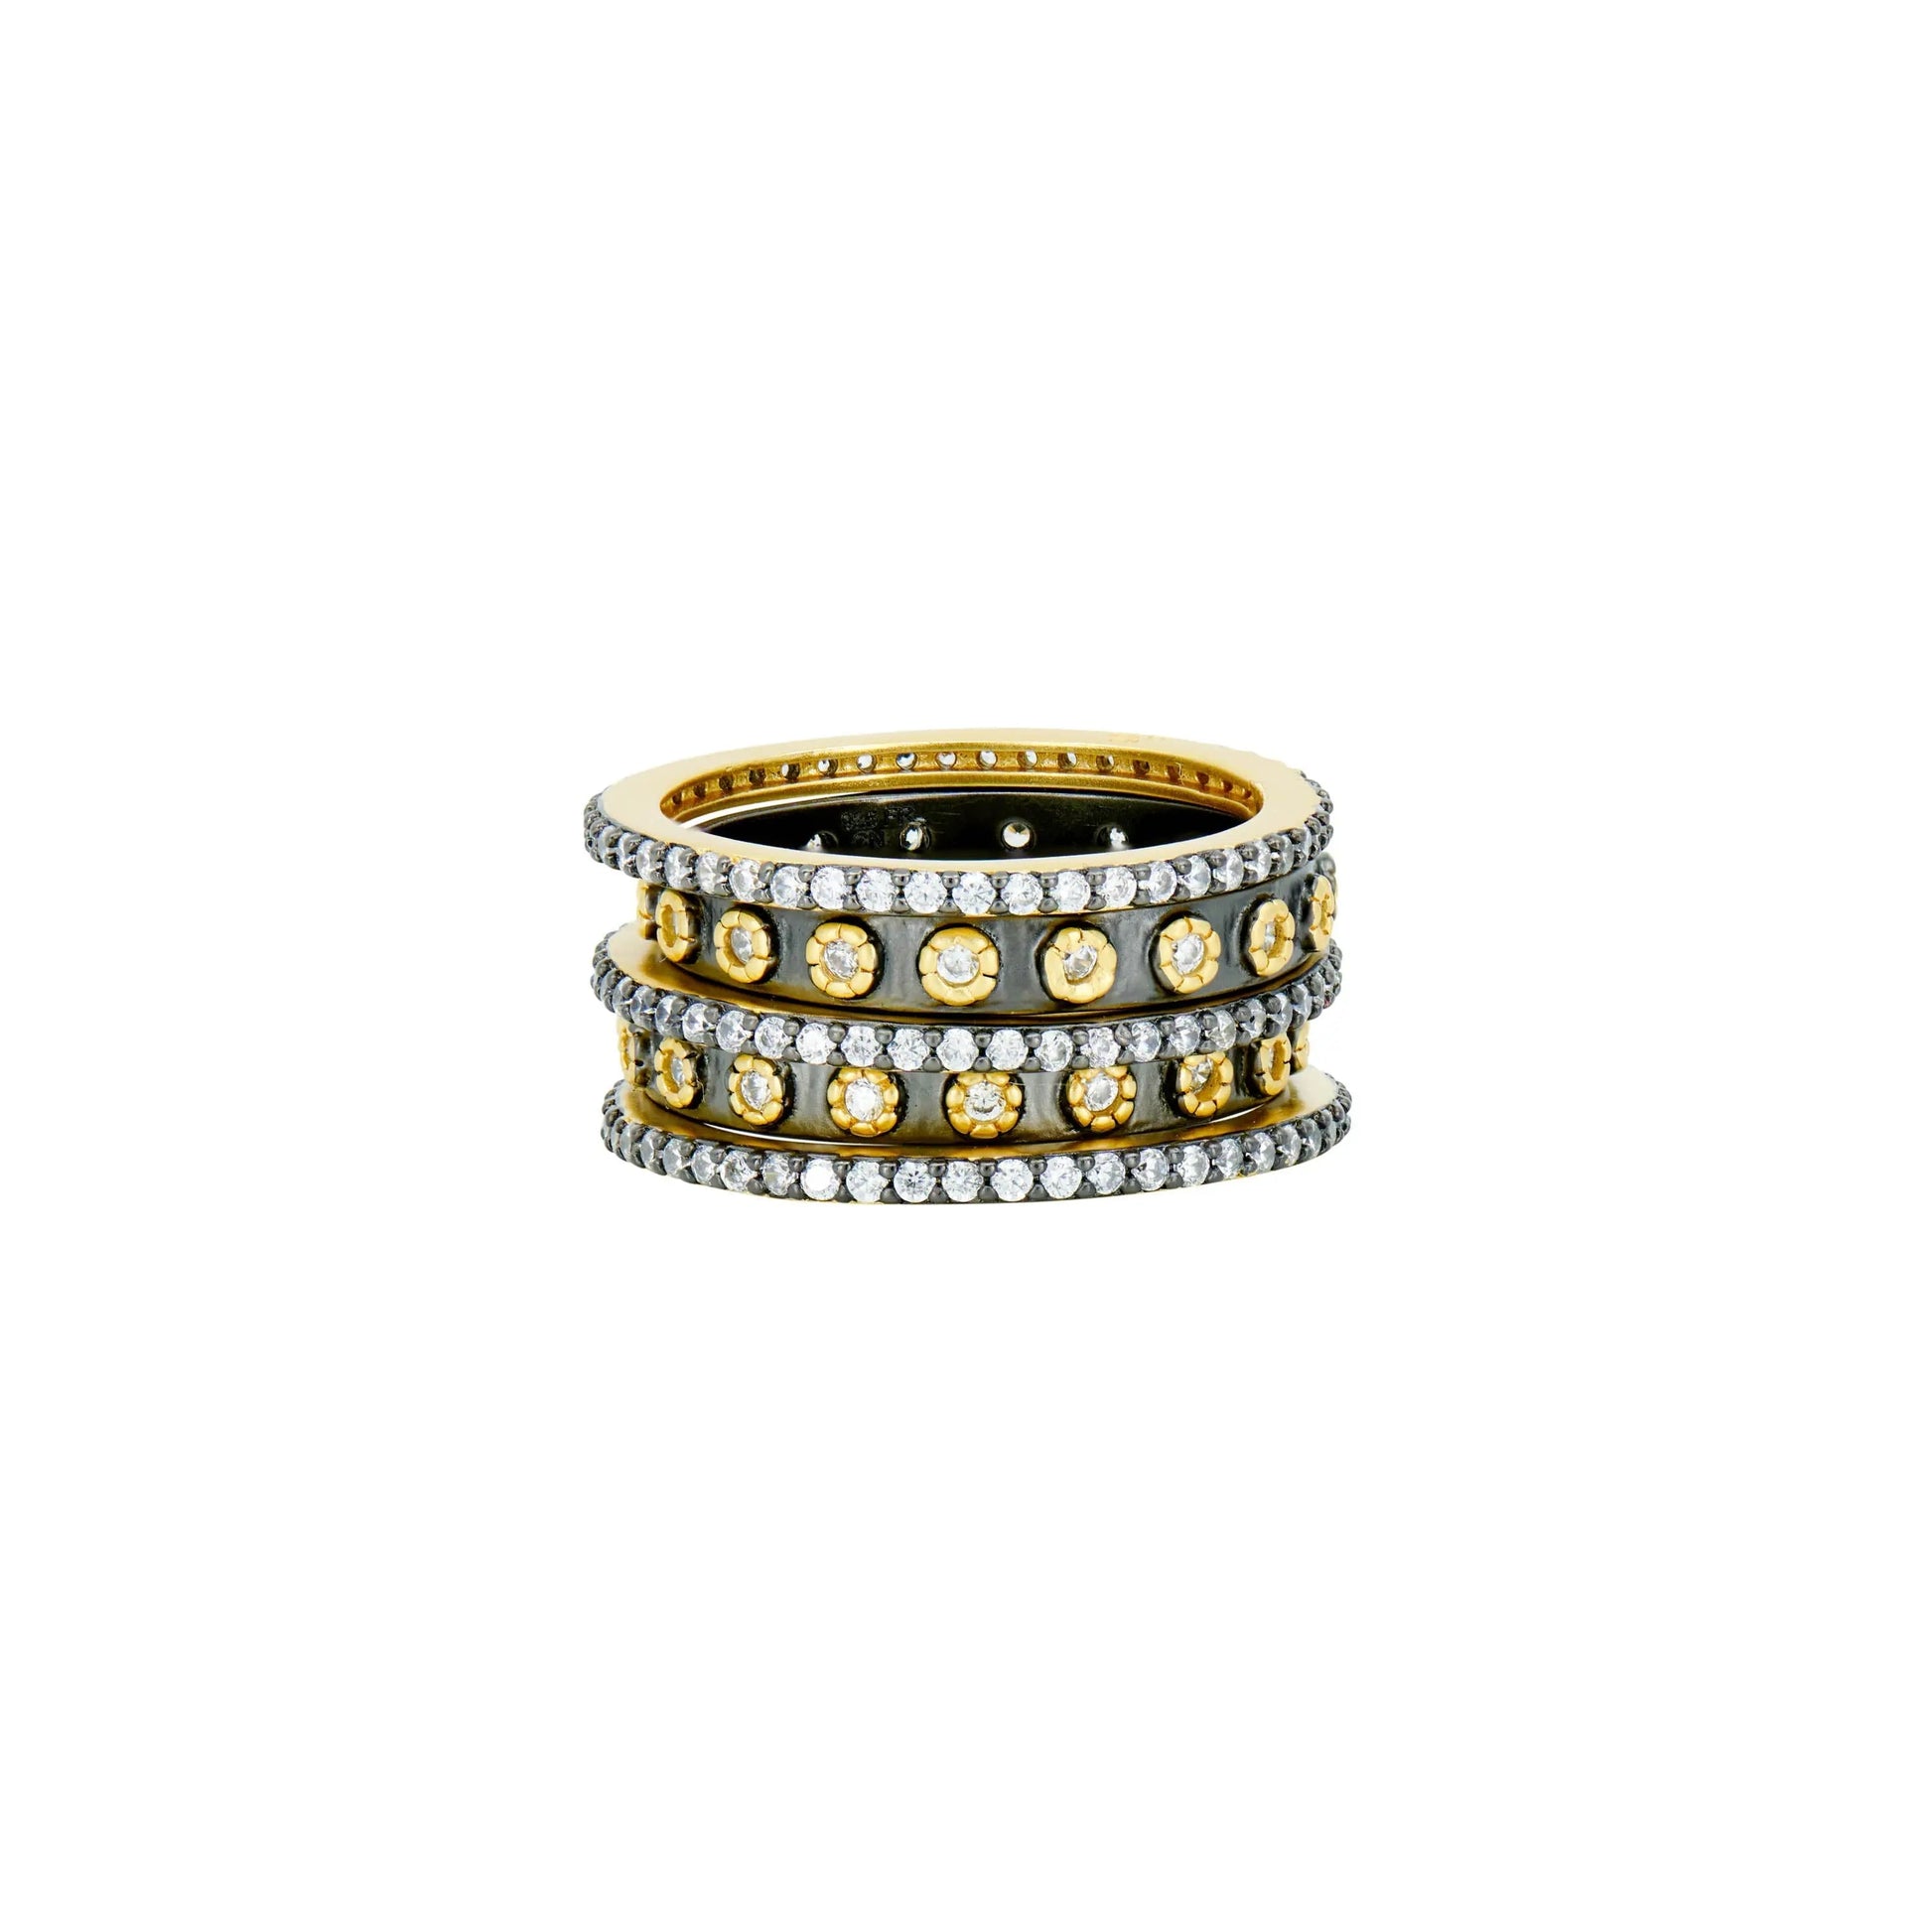 BlackGold14KGold11 Two Tone 5-Stack Ring Signature RING